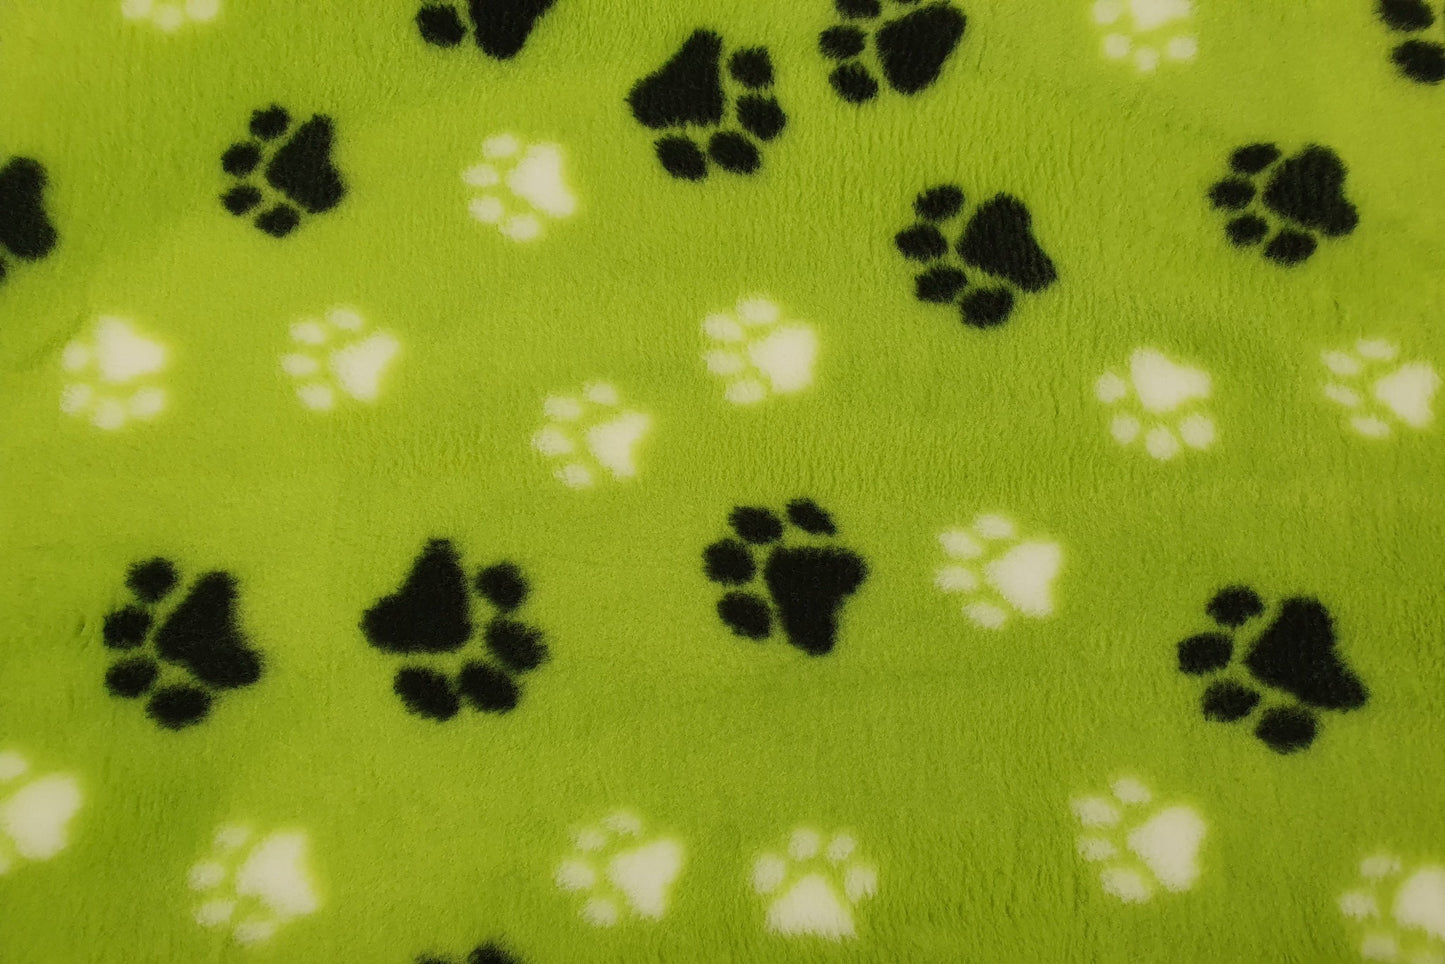 Vet Bed - Rubber Backed - Lime Green with Black and White Paws